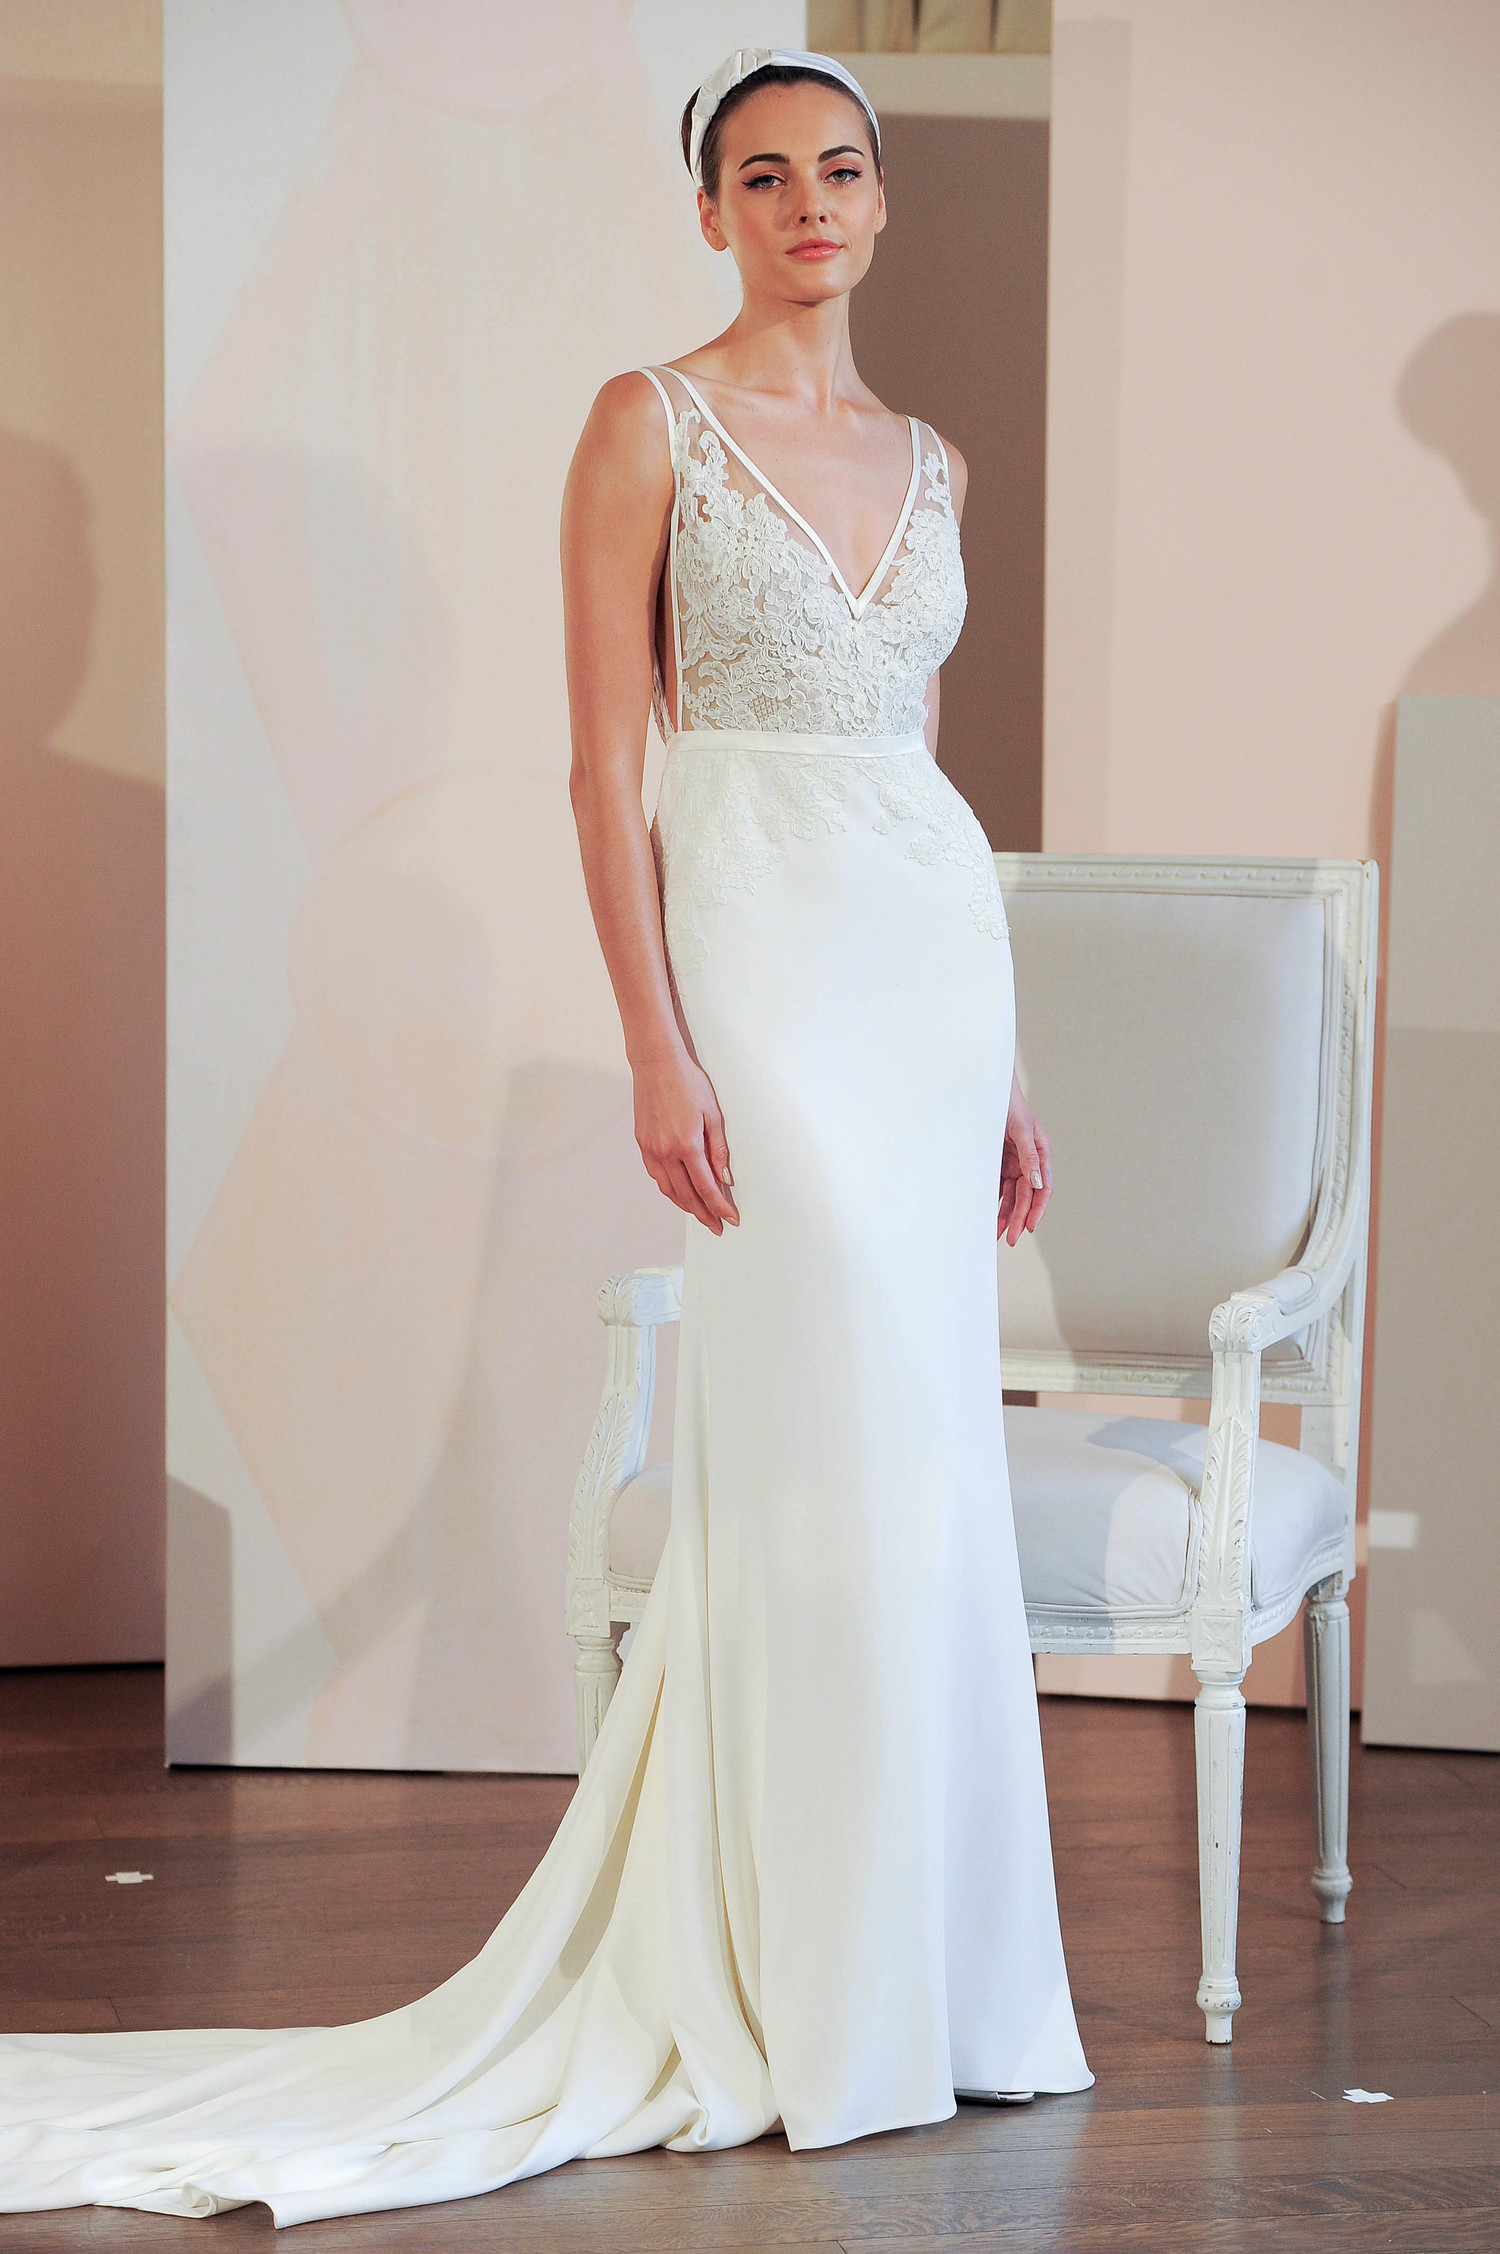 anne barge wedding gowns